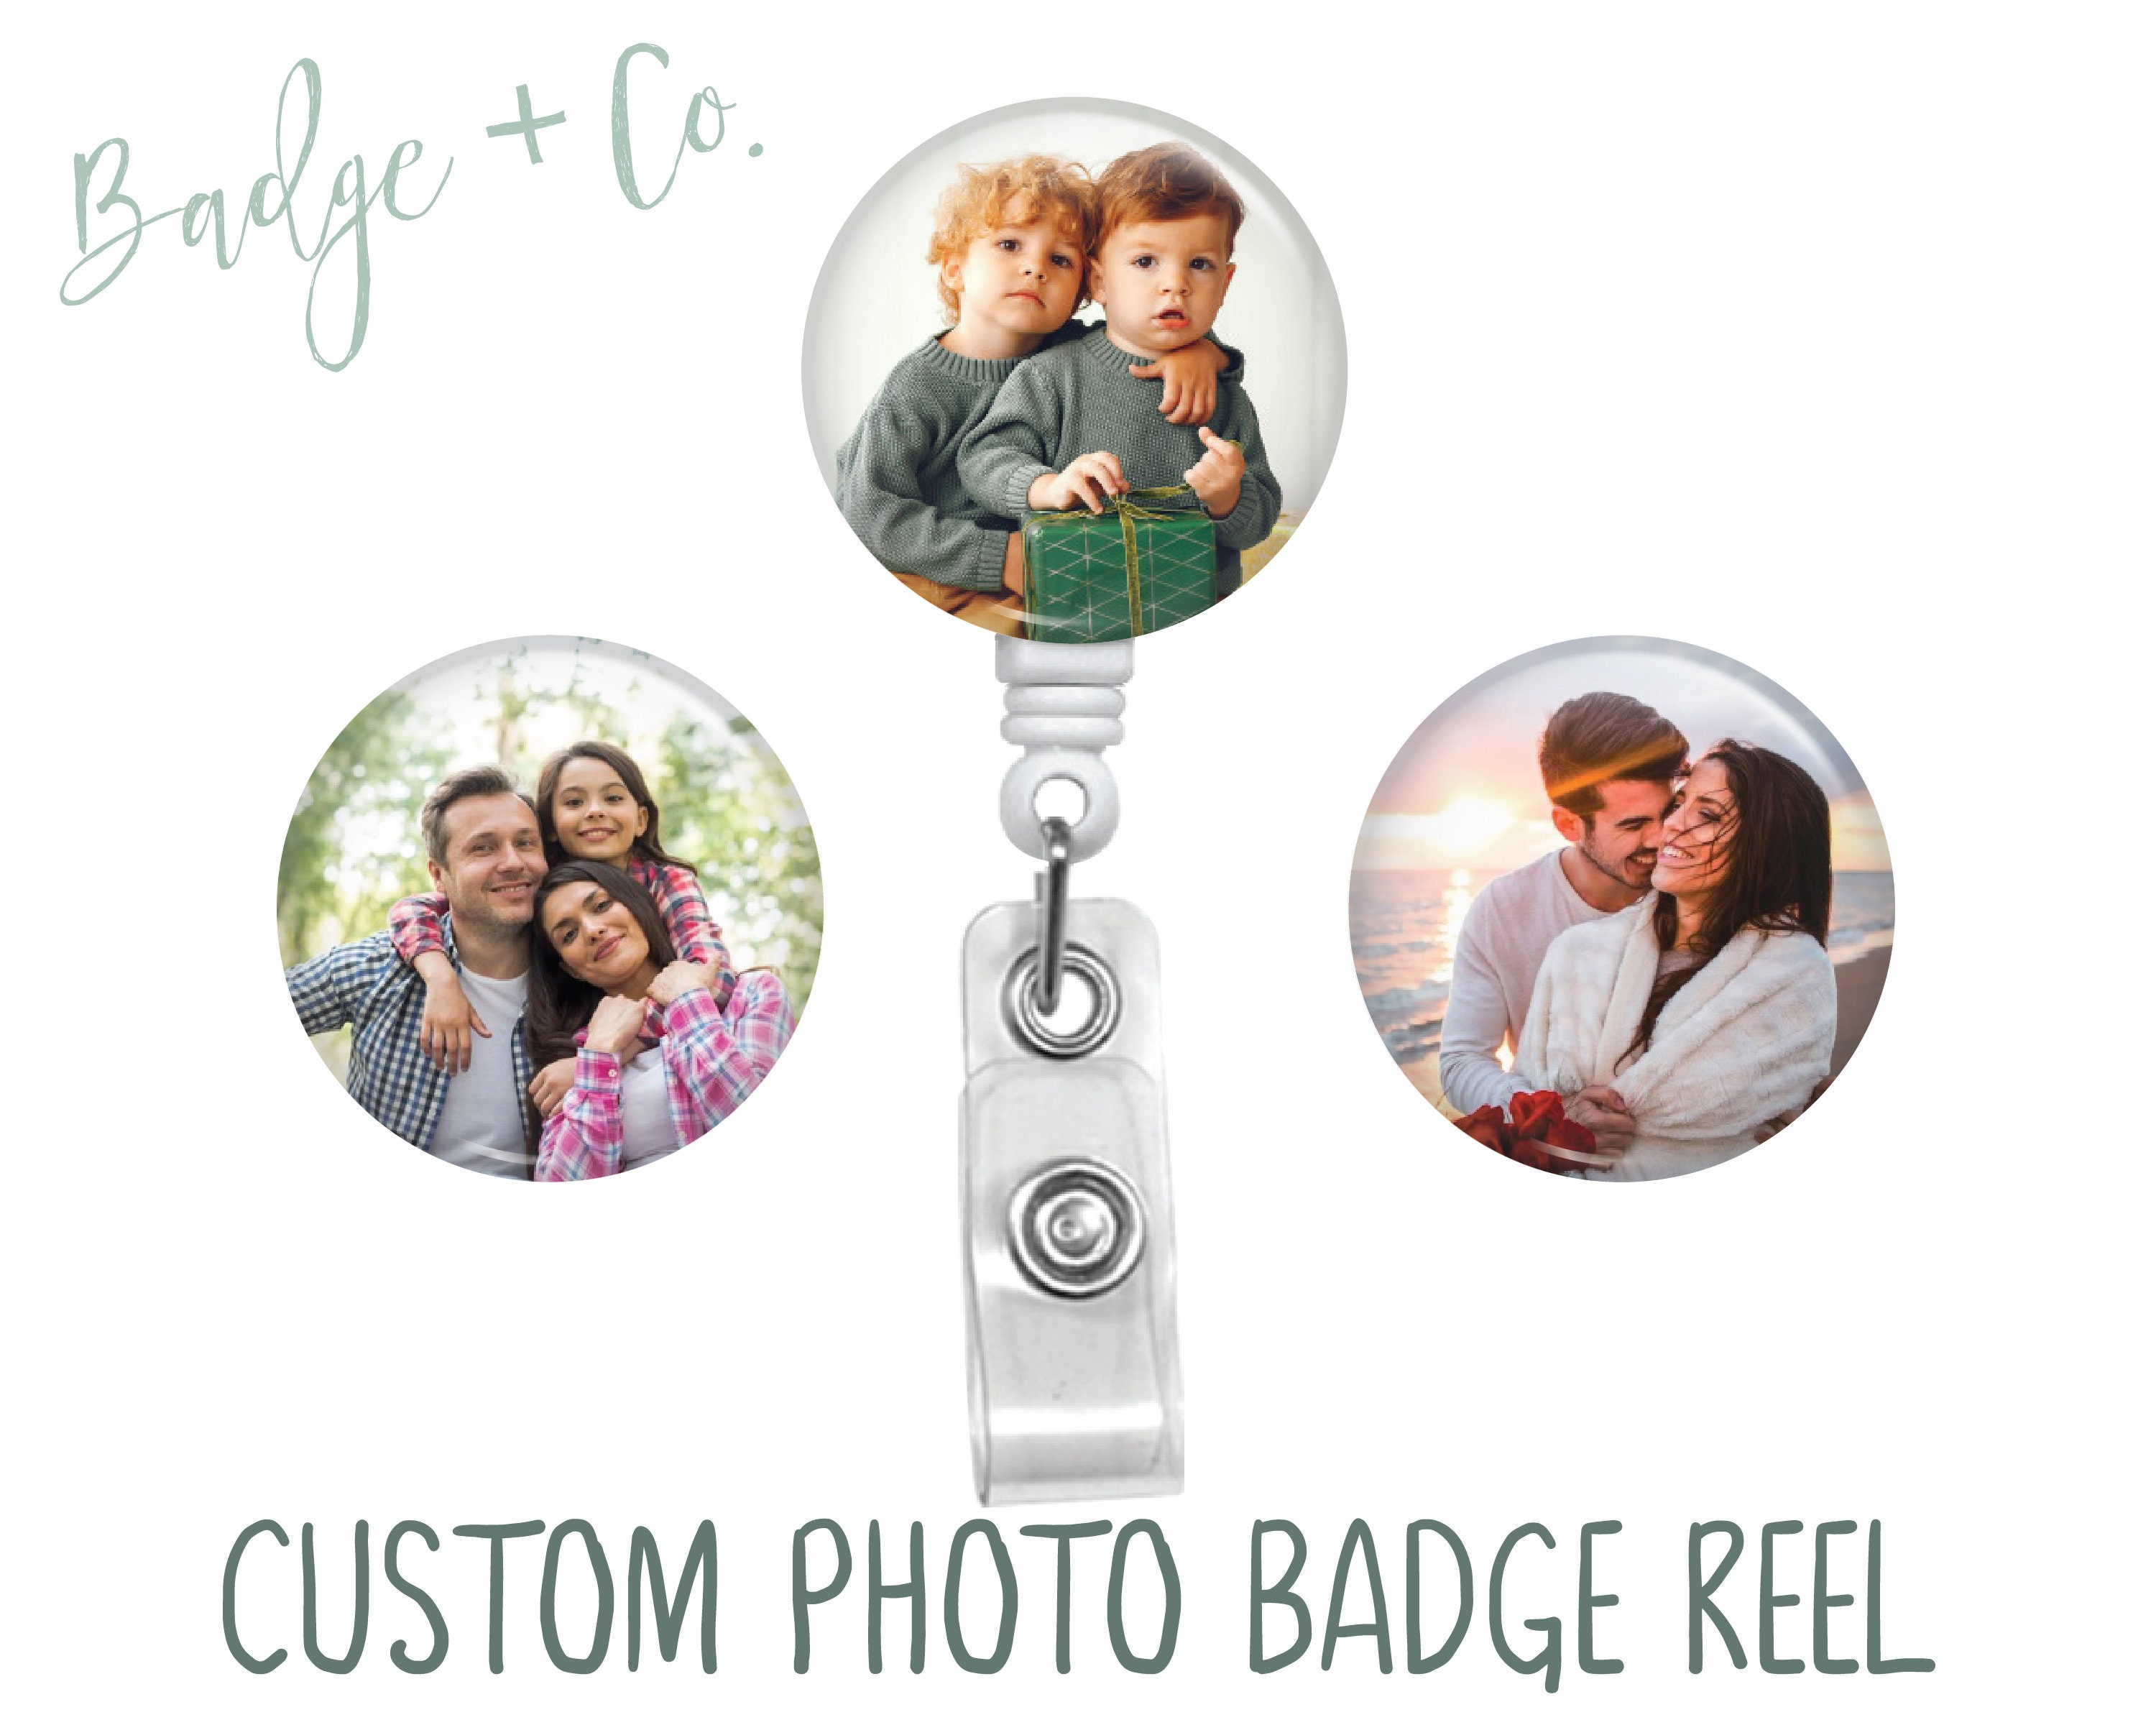 Custom Photo Badge Reel Customized Retractable ID Holder Gift Create Your  Own Pet Photo Badge Reel Kids Picture Gift for Nurses or Teachers 